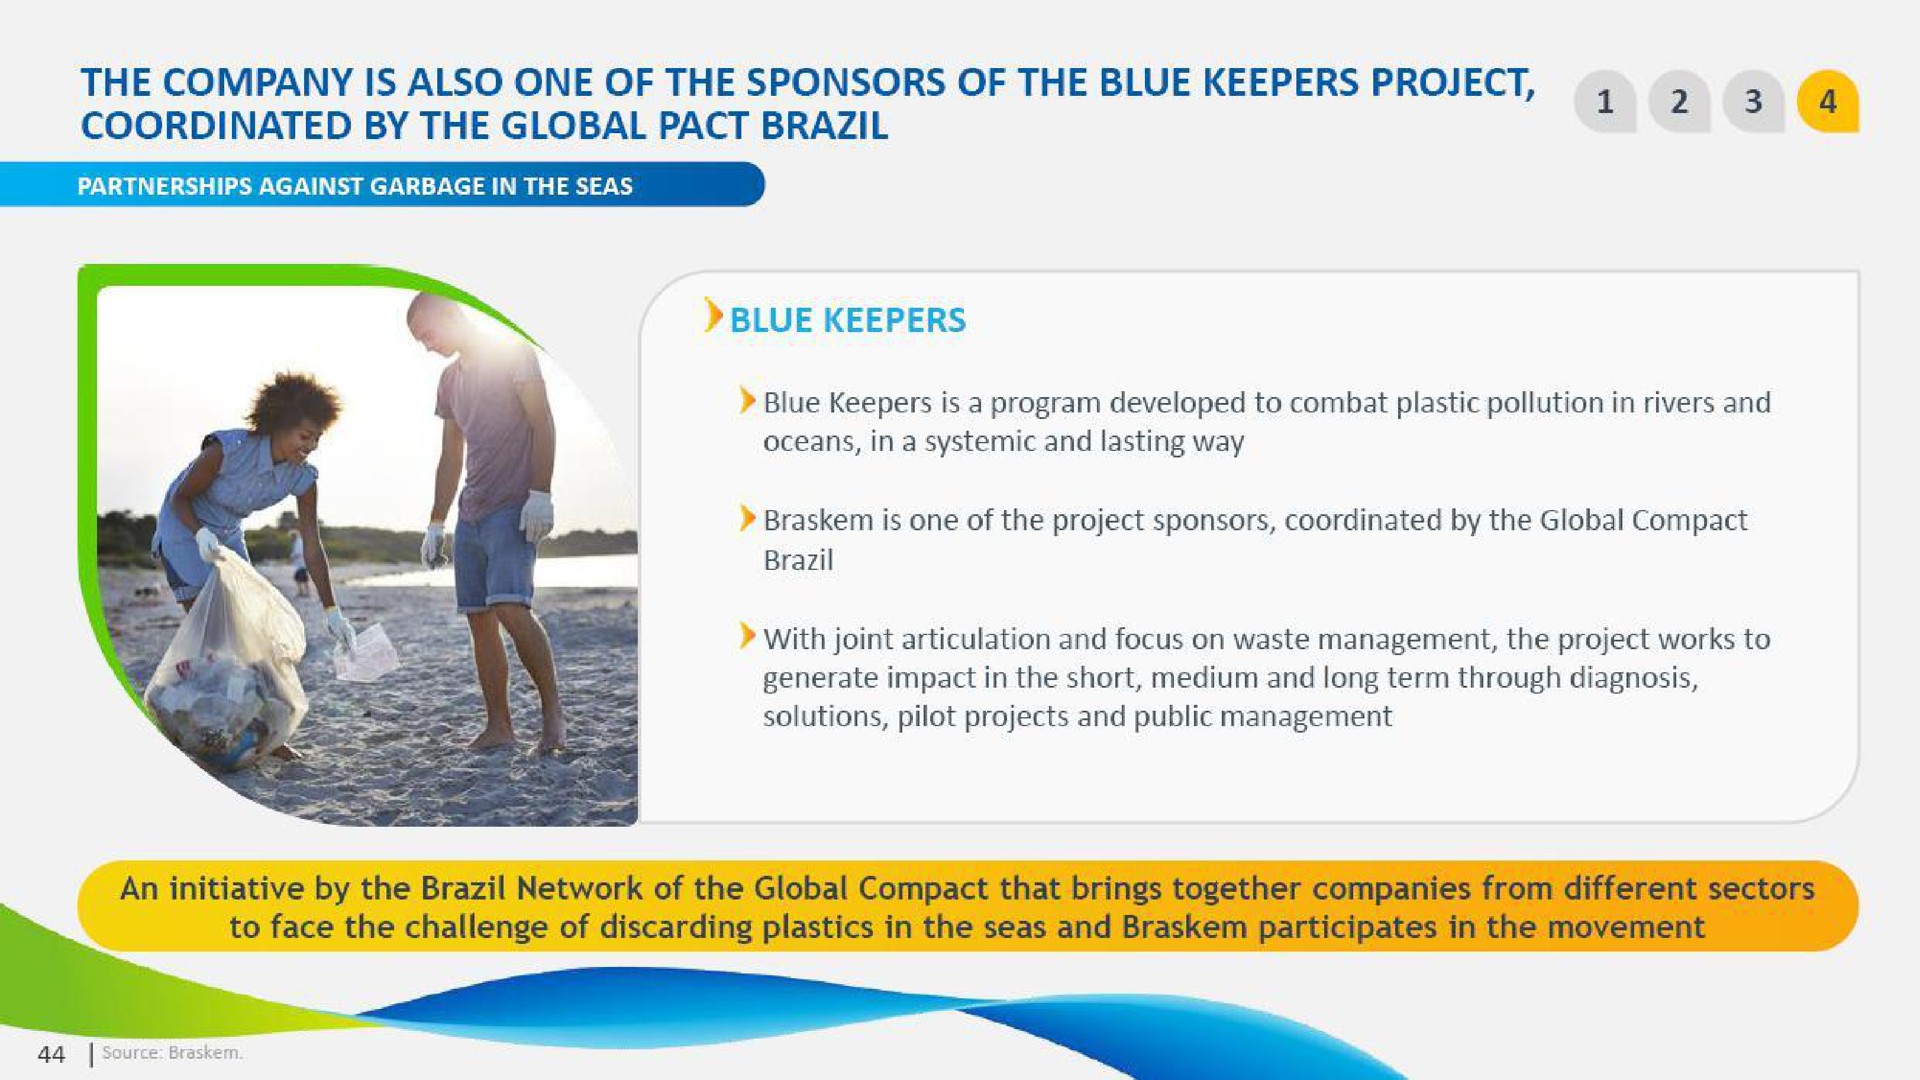 the company is also one of the sponsors of the blue keepers project by the global pact brazil | Braskem